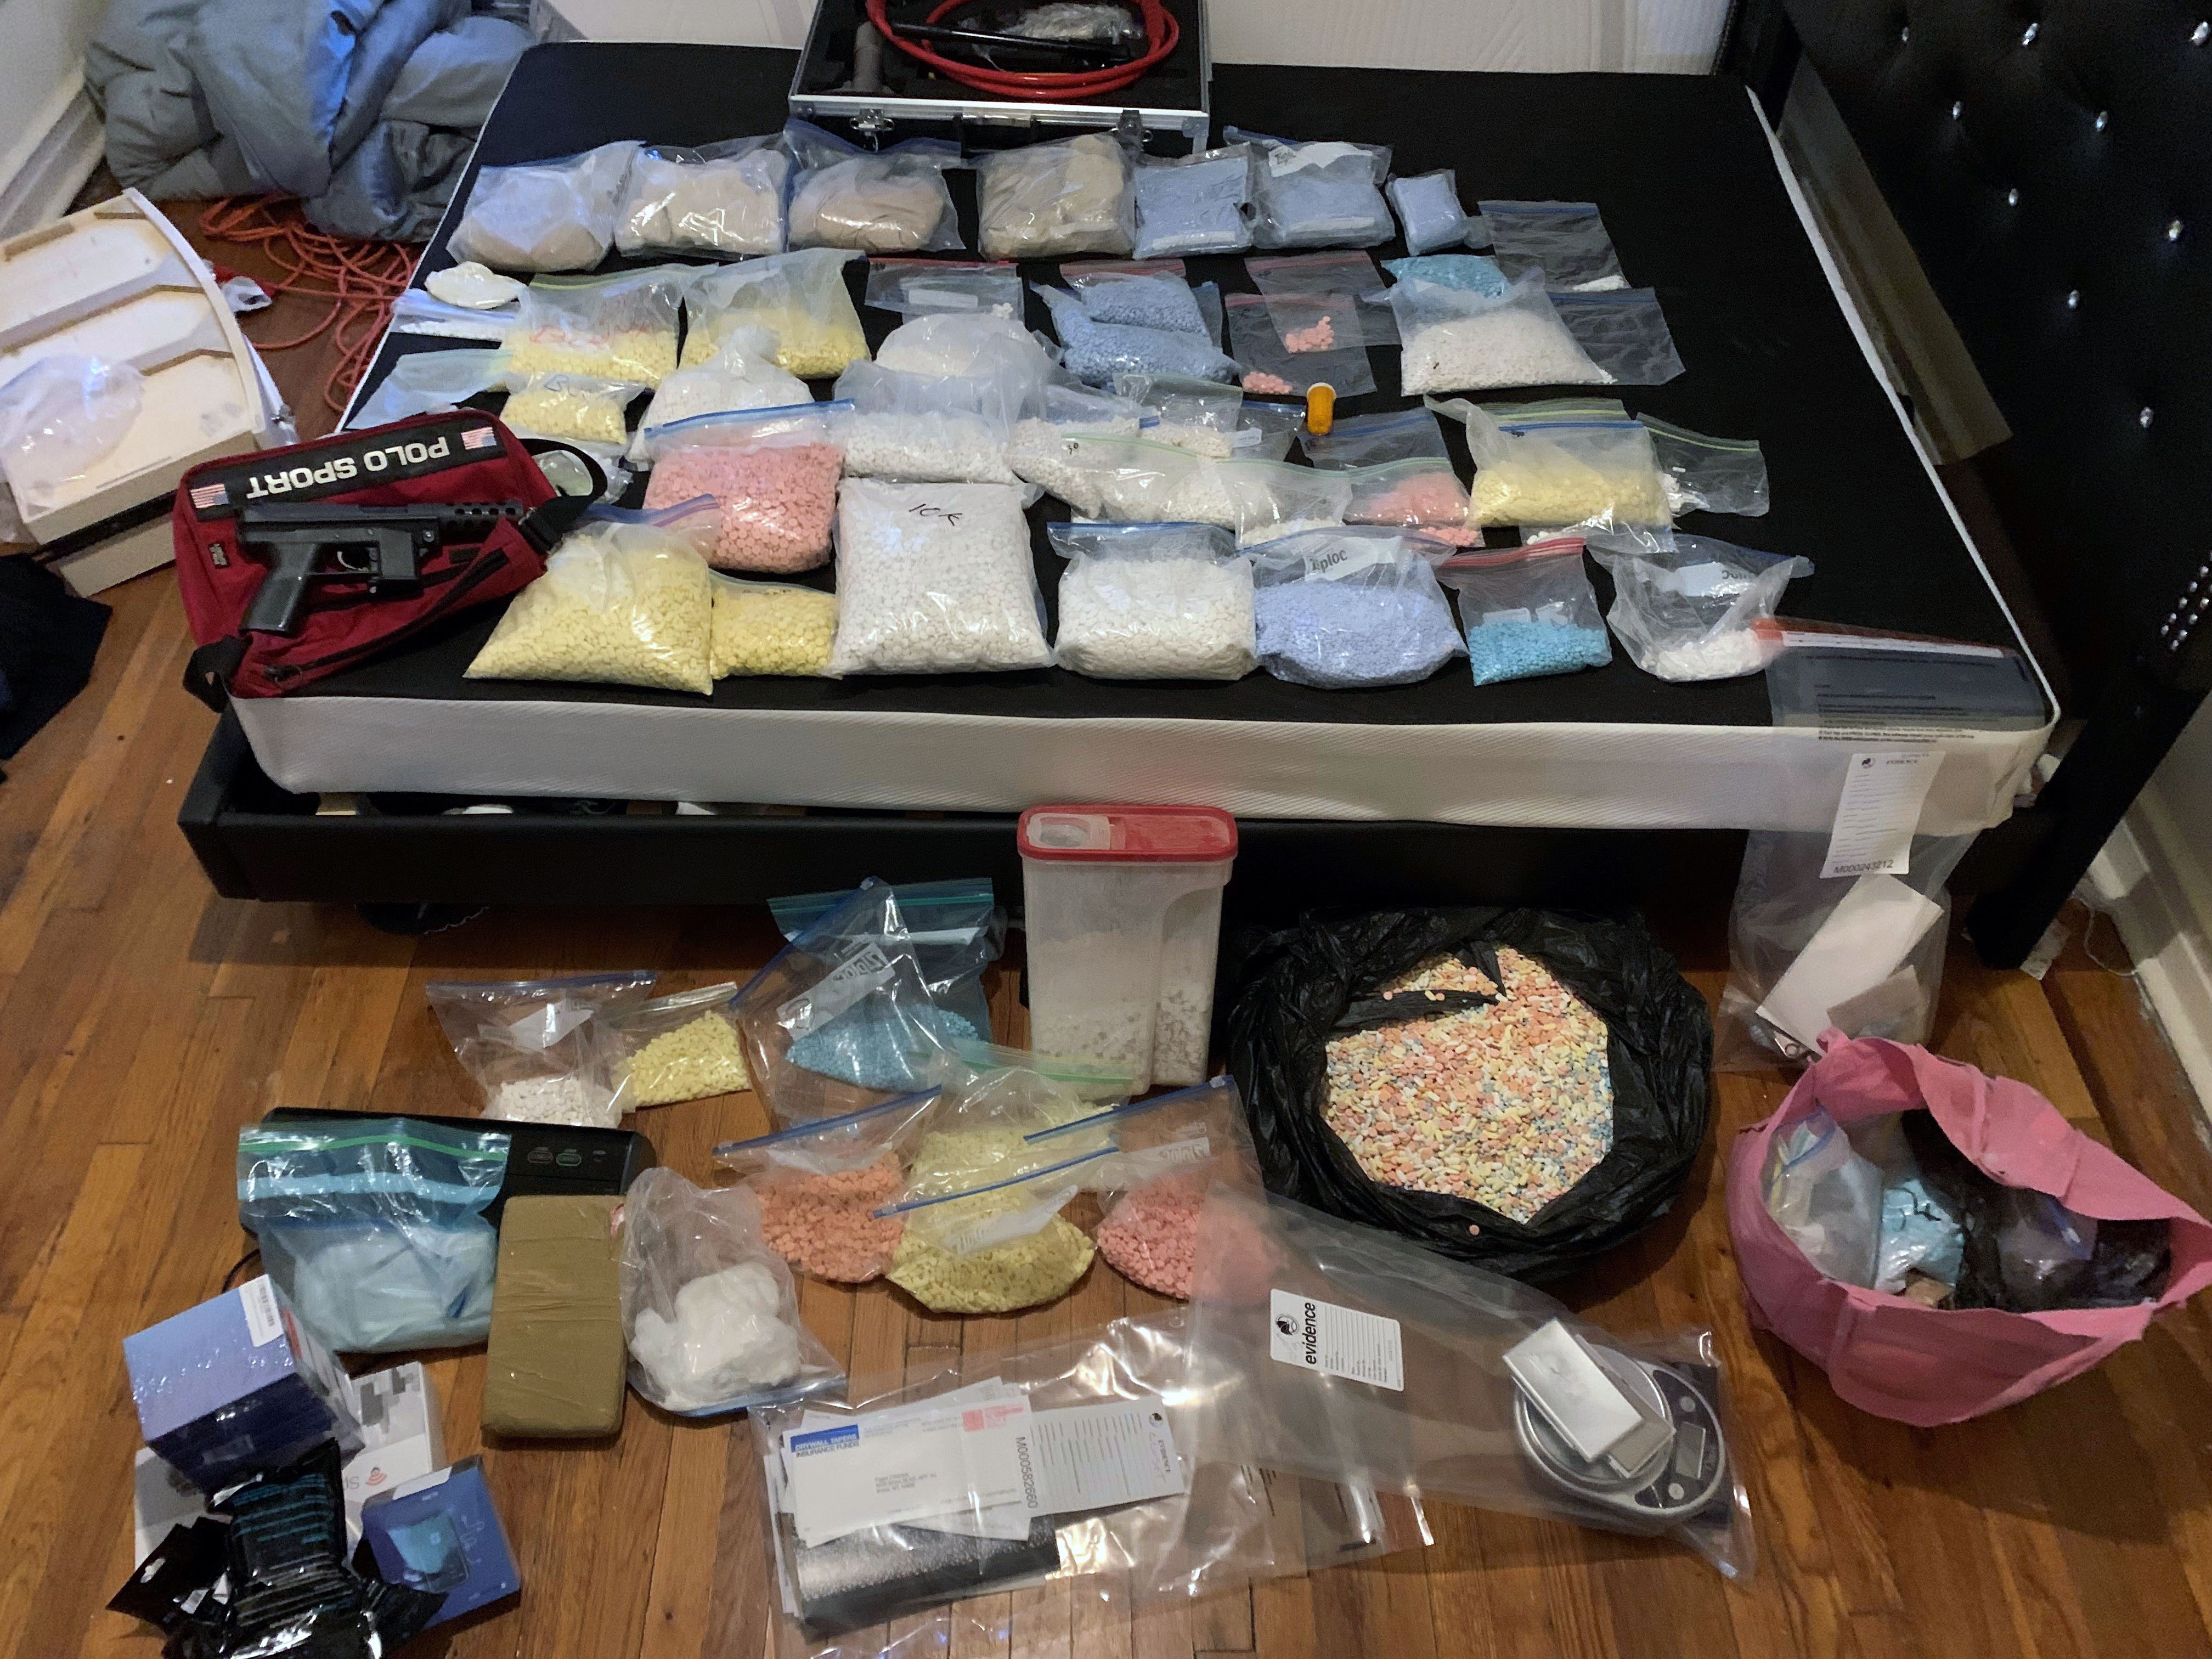 Largest pill seizure in New Jersey's history' made by authorities